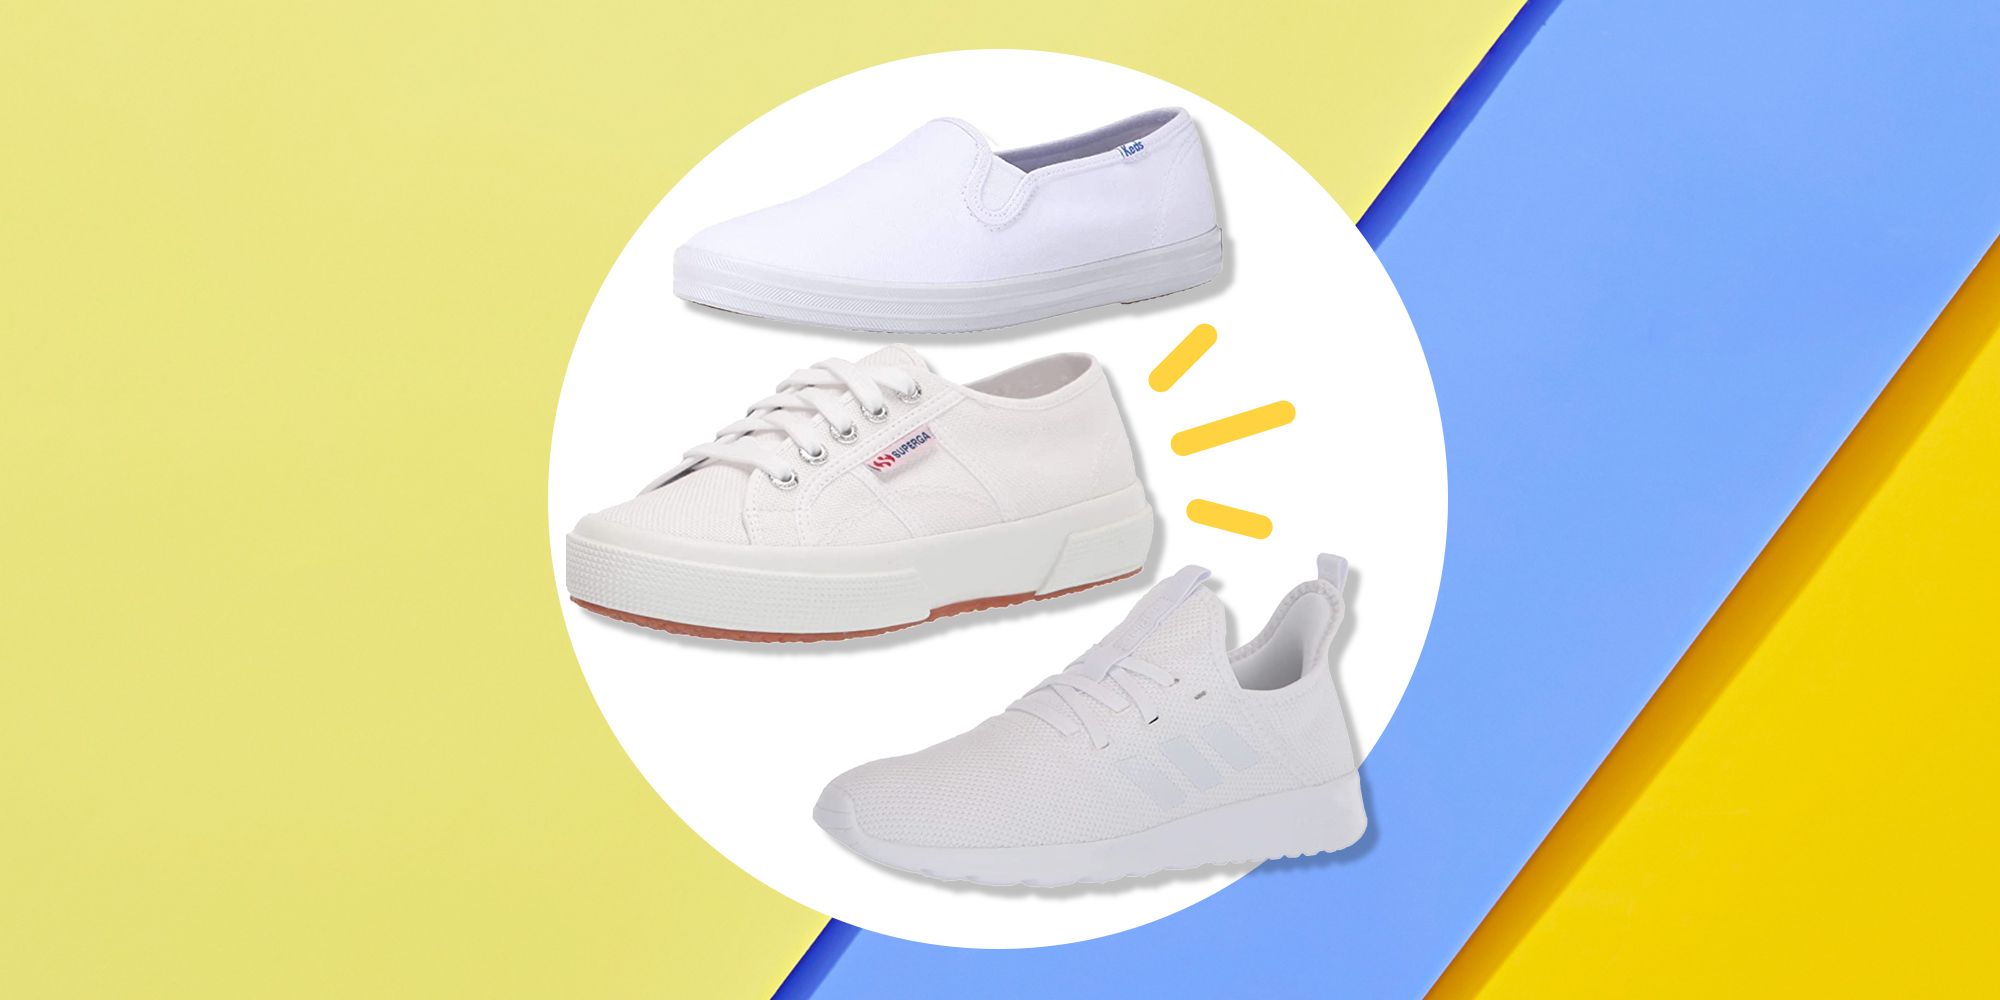 Best White Sneakers for Women 2021: Classic, Comfy & Stylish Sneakers